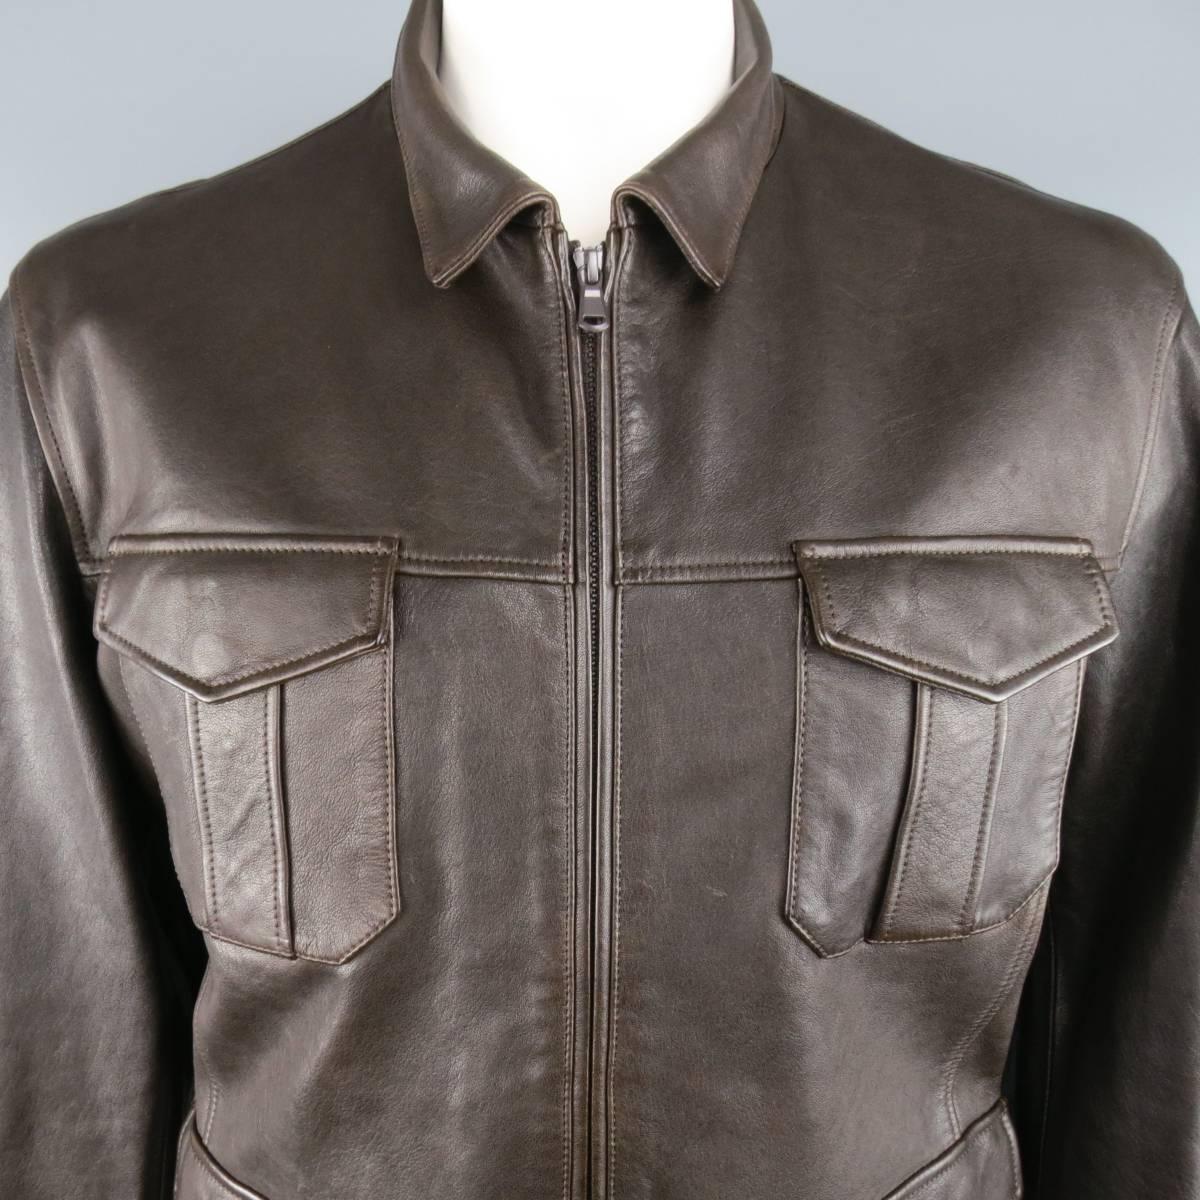 Brunello Cucinelli military style jacket comes in soft and smooth rich chocolate brown leather and features a pointed collar, tonal double zip closure, burgundy windbreaker liner, and patch flap pockets. Made in Italy.  Retailed at $6340.00
 
New